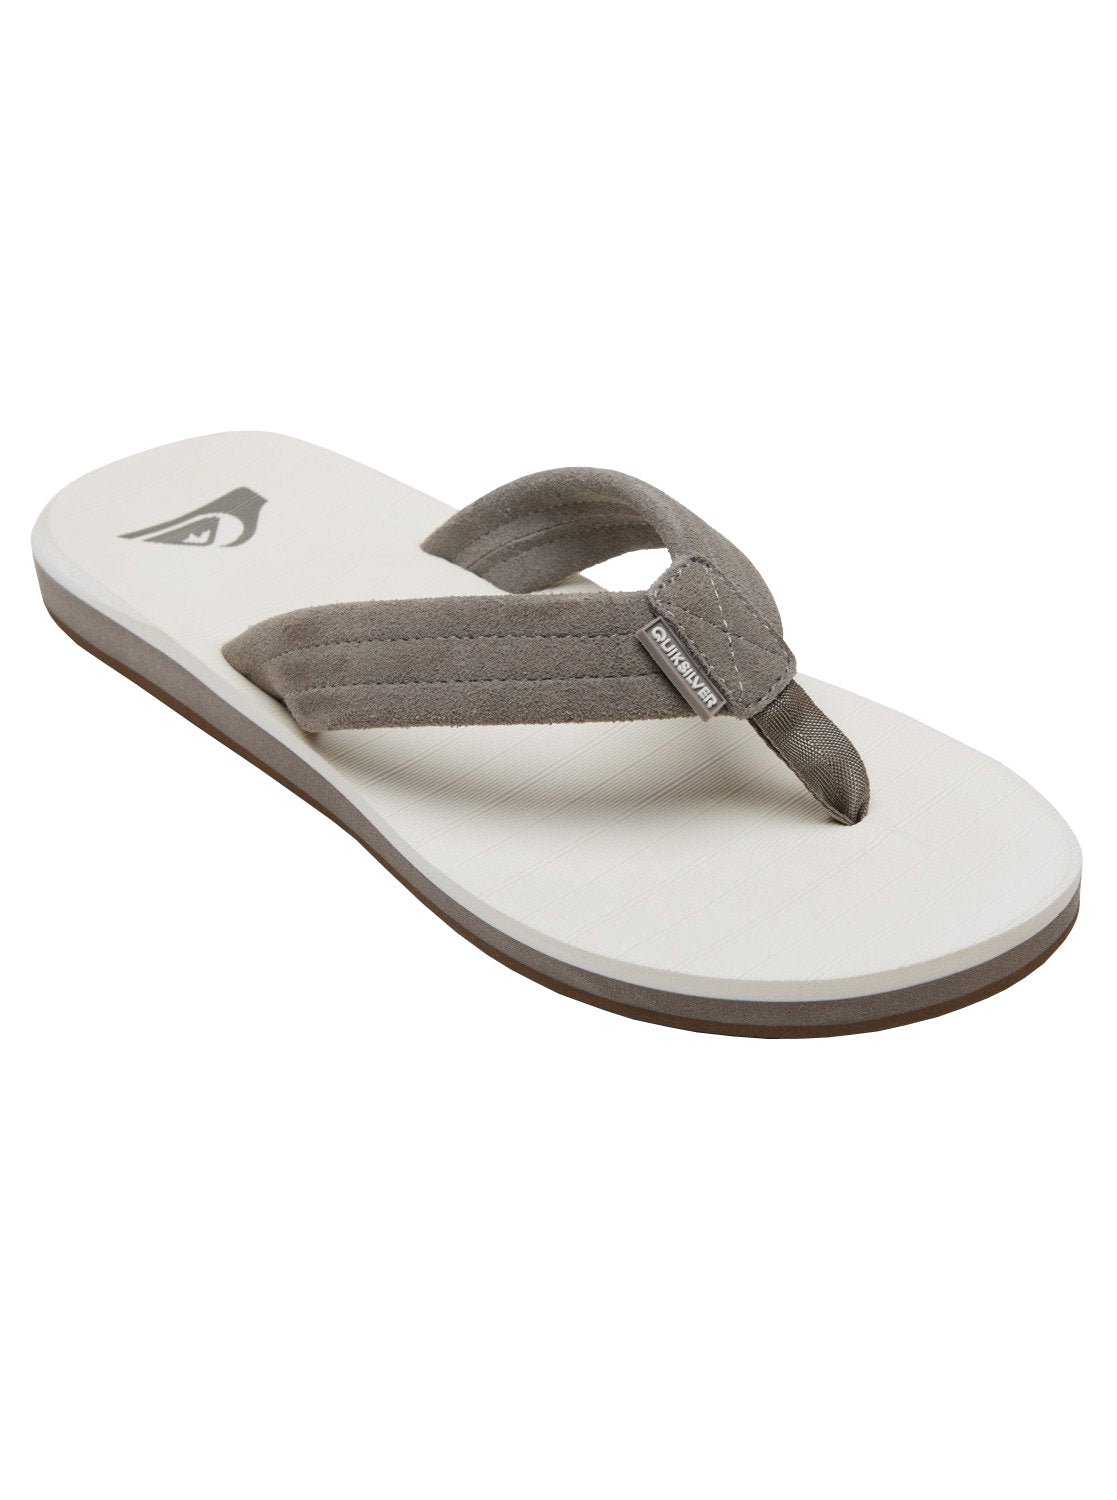 Quiksilver Carver Suede Mens Sandal XSWS-Grey-White-Grey 11